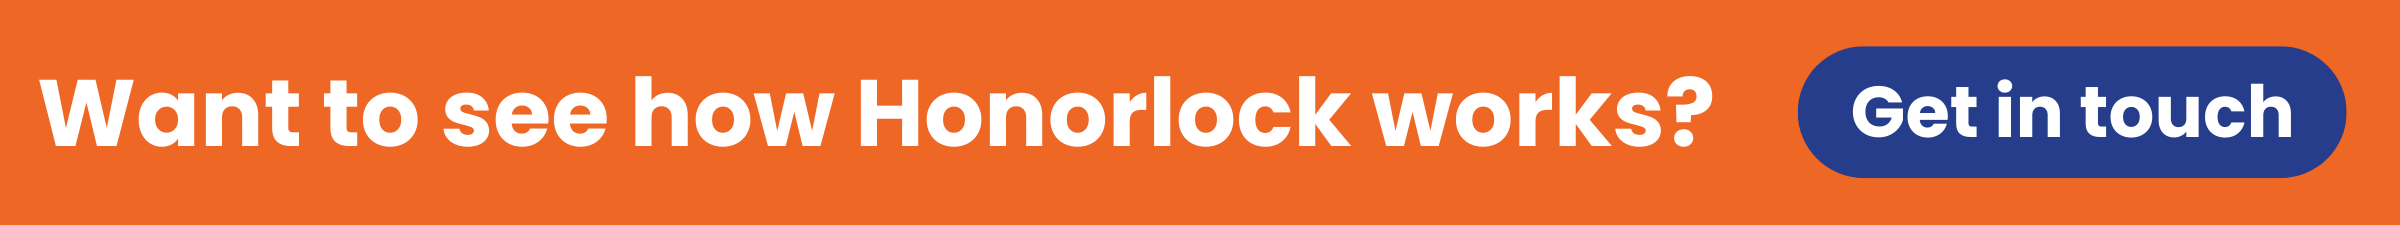 banner to schedule a demo with Honorlock